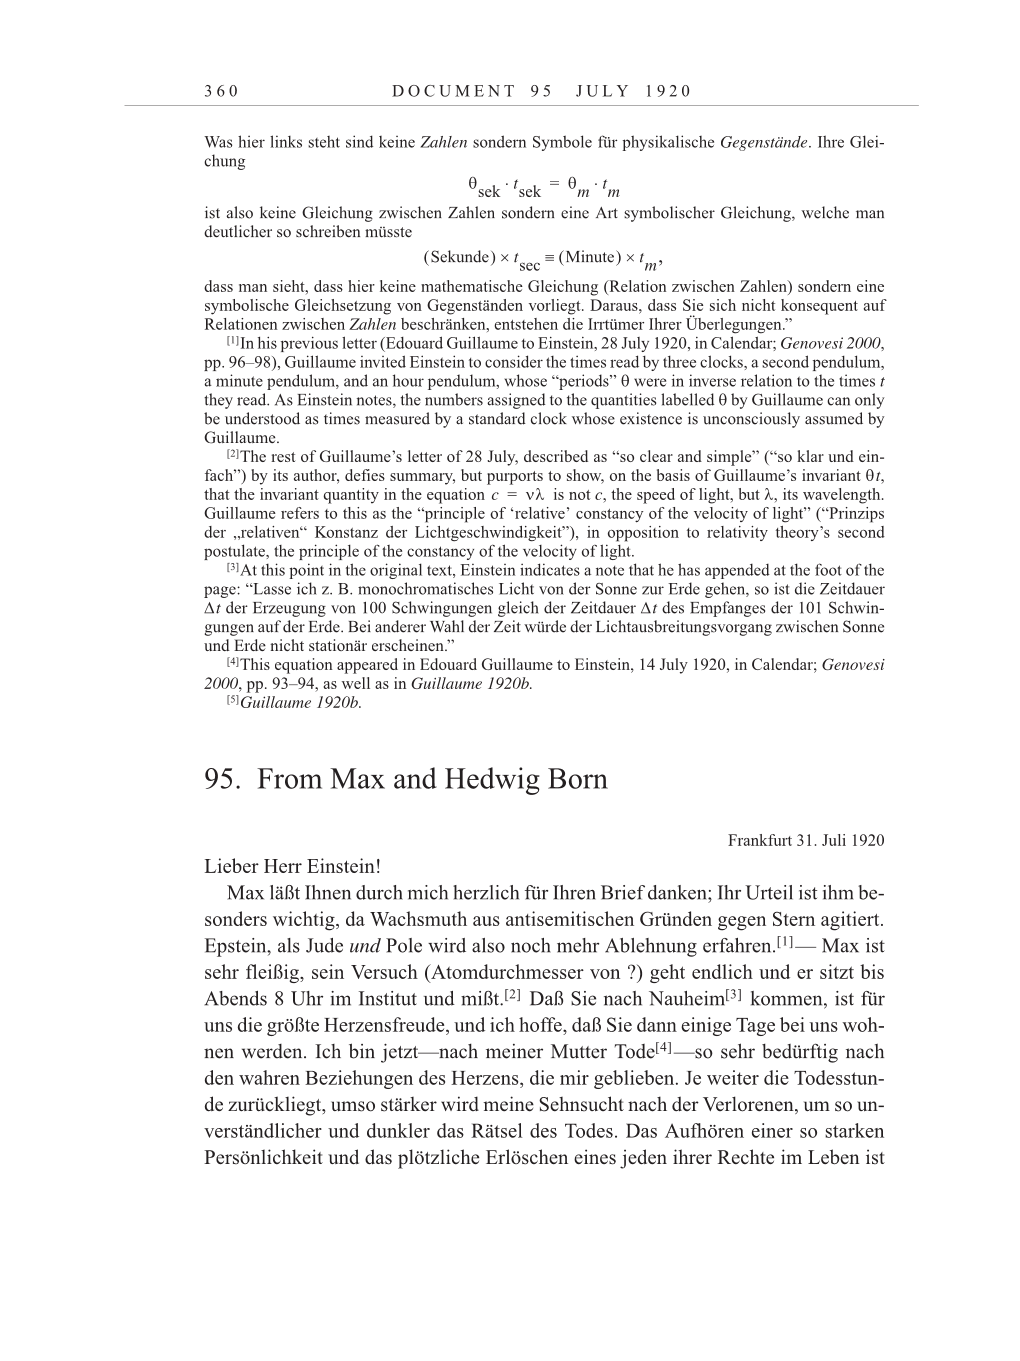 Volume 10: The Berlin Years: Correspondence May-December 1920 / Supplementary Correspondence 1909-1920 page 360